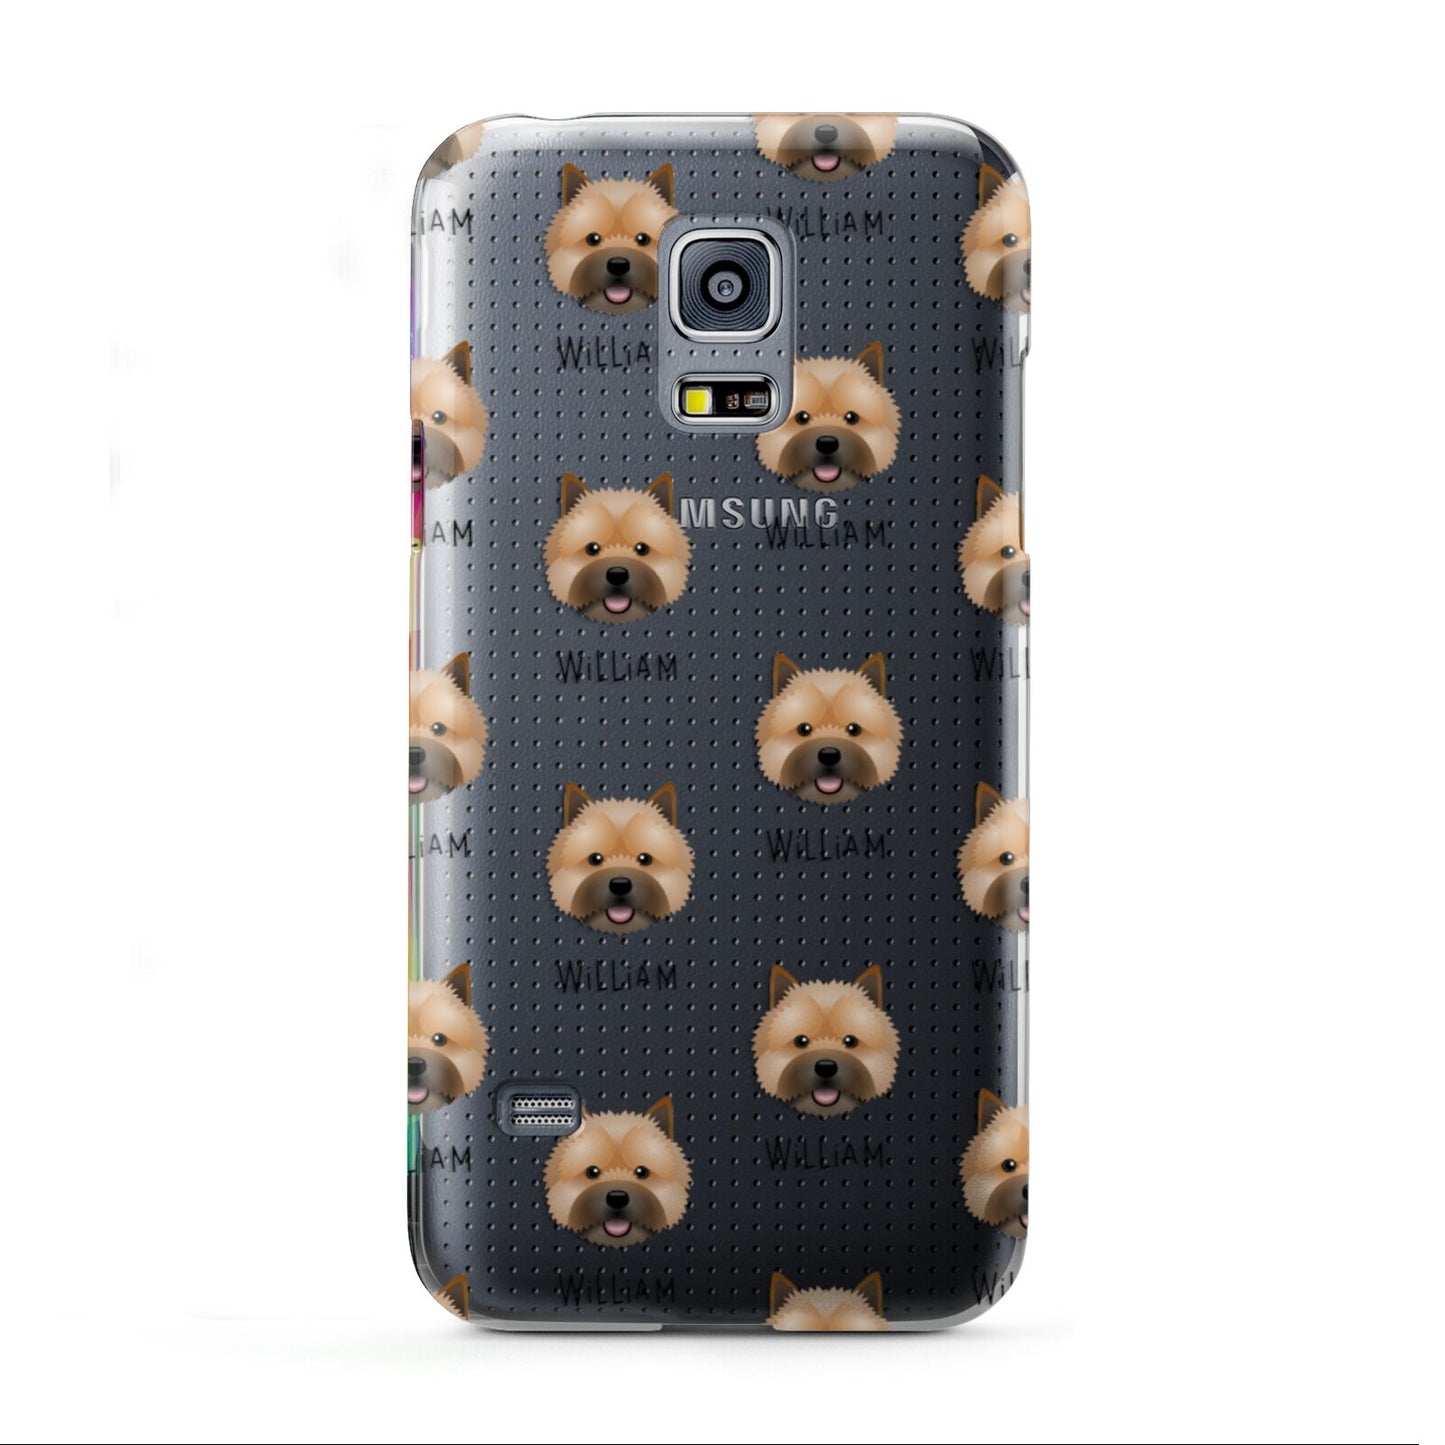 Norwich Terrier Icon with Name Samsung Galaxy S5 Mini Case